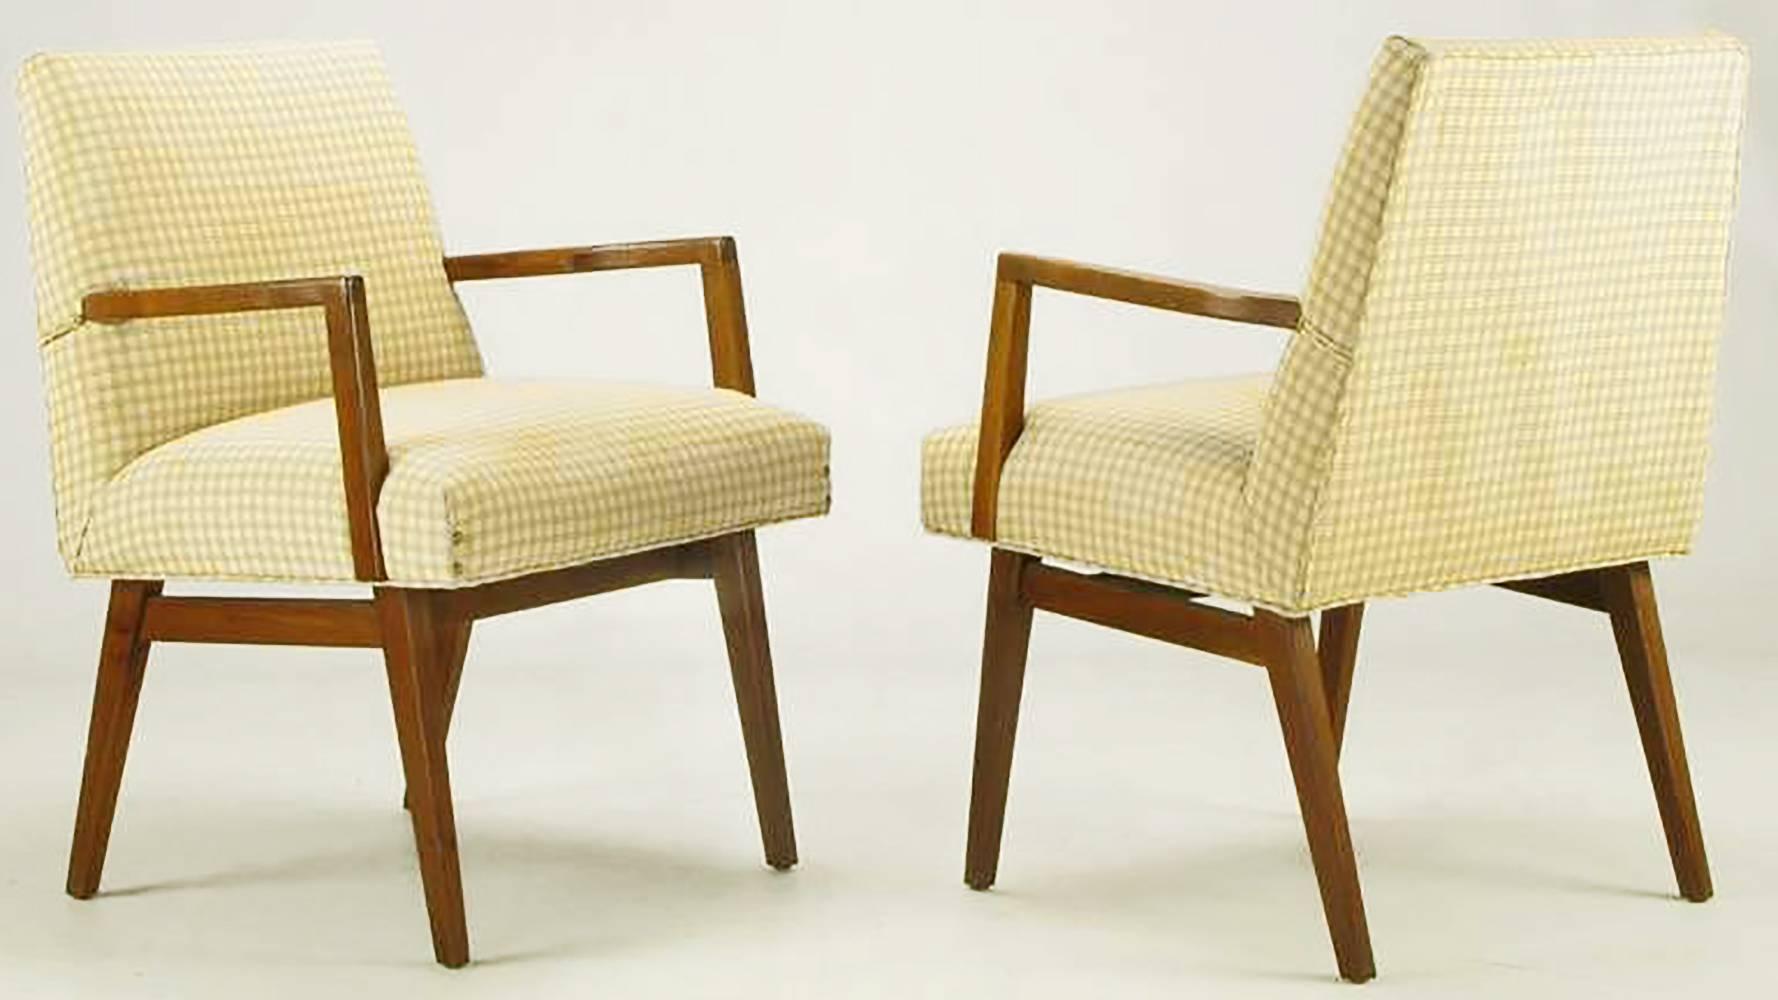 The designer of these chairs slightly distorted their proportions to create intriguing seating that is sculptural in feel. The backs are a polygons with just the slightest arc in the seat backs as they taper to the top. Carved walnut arms are wider